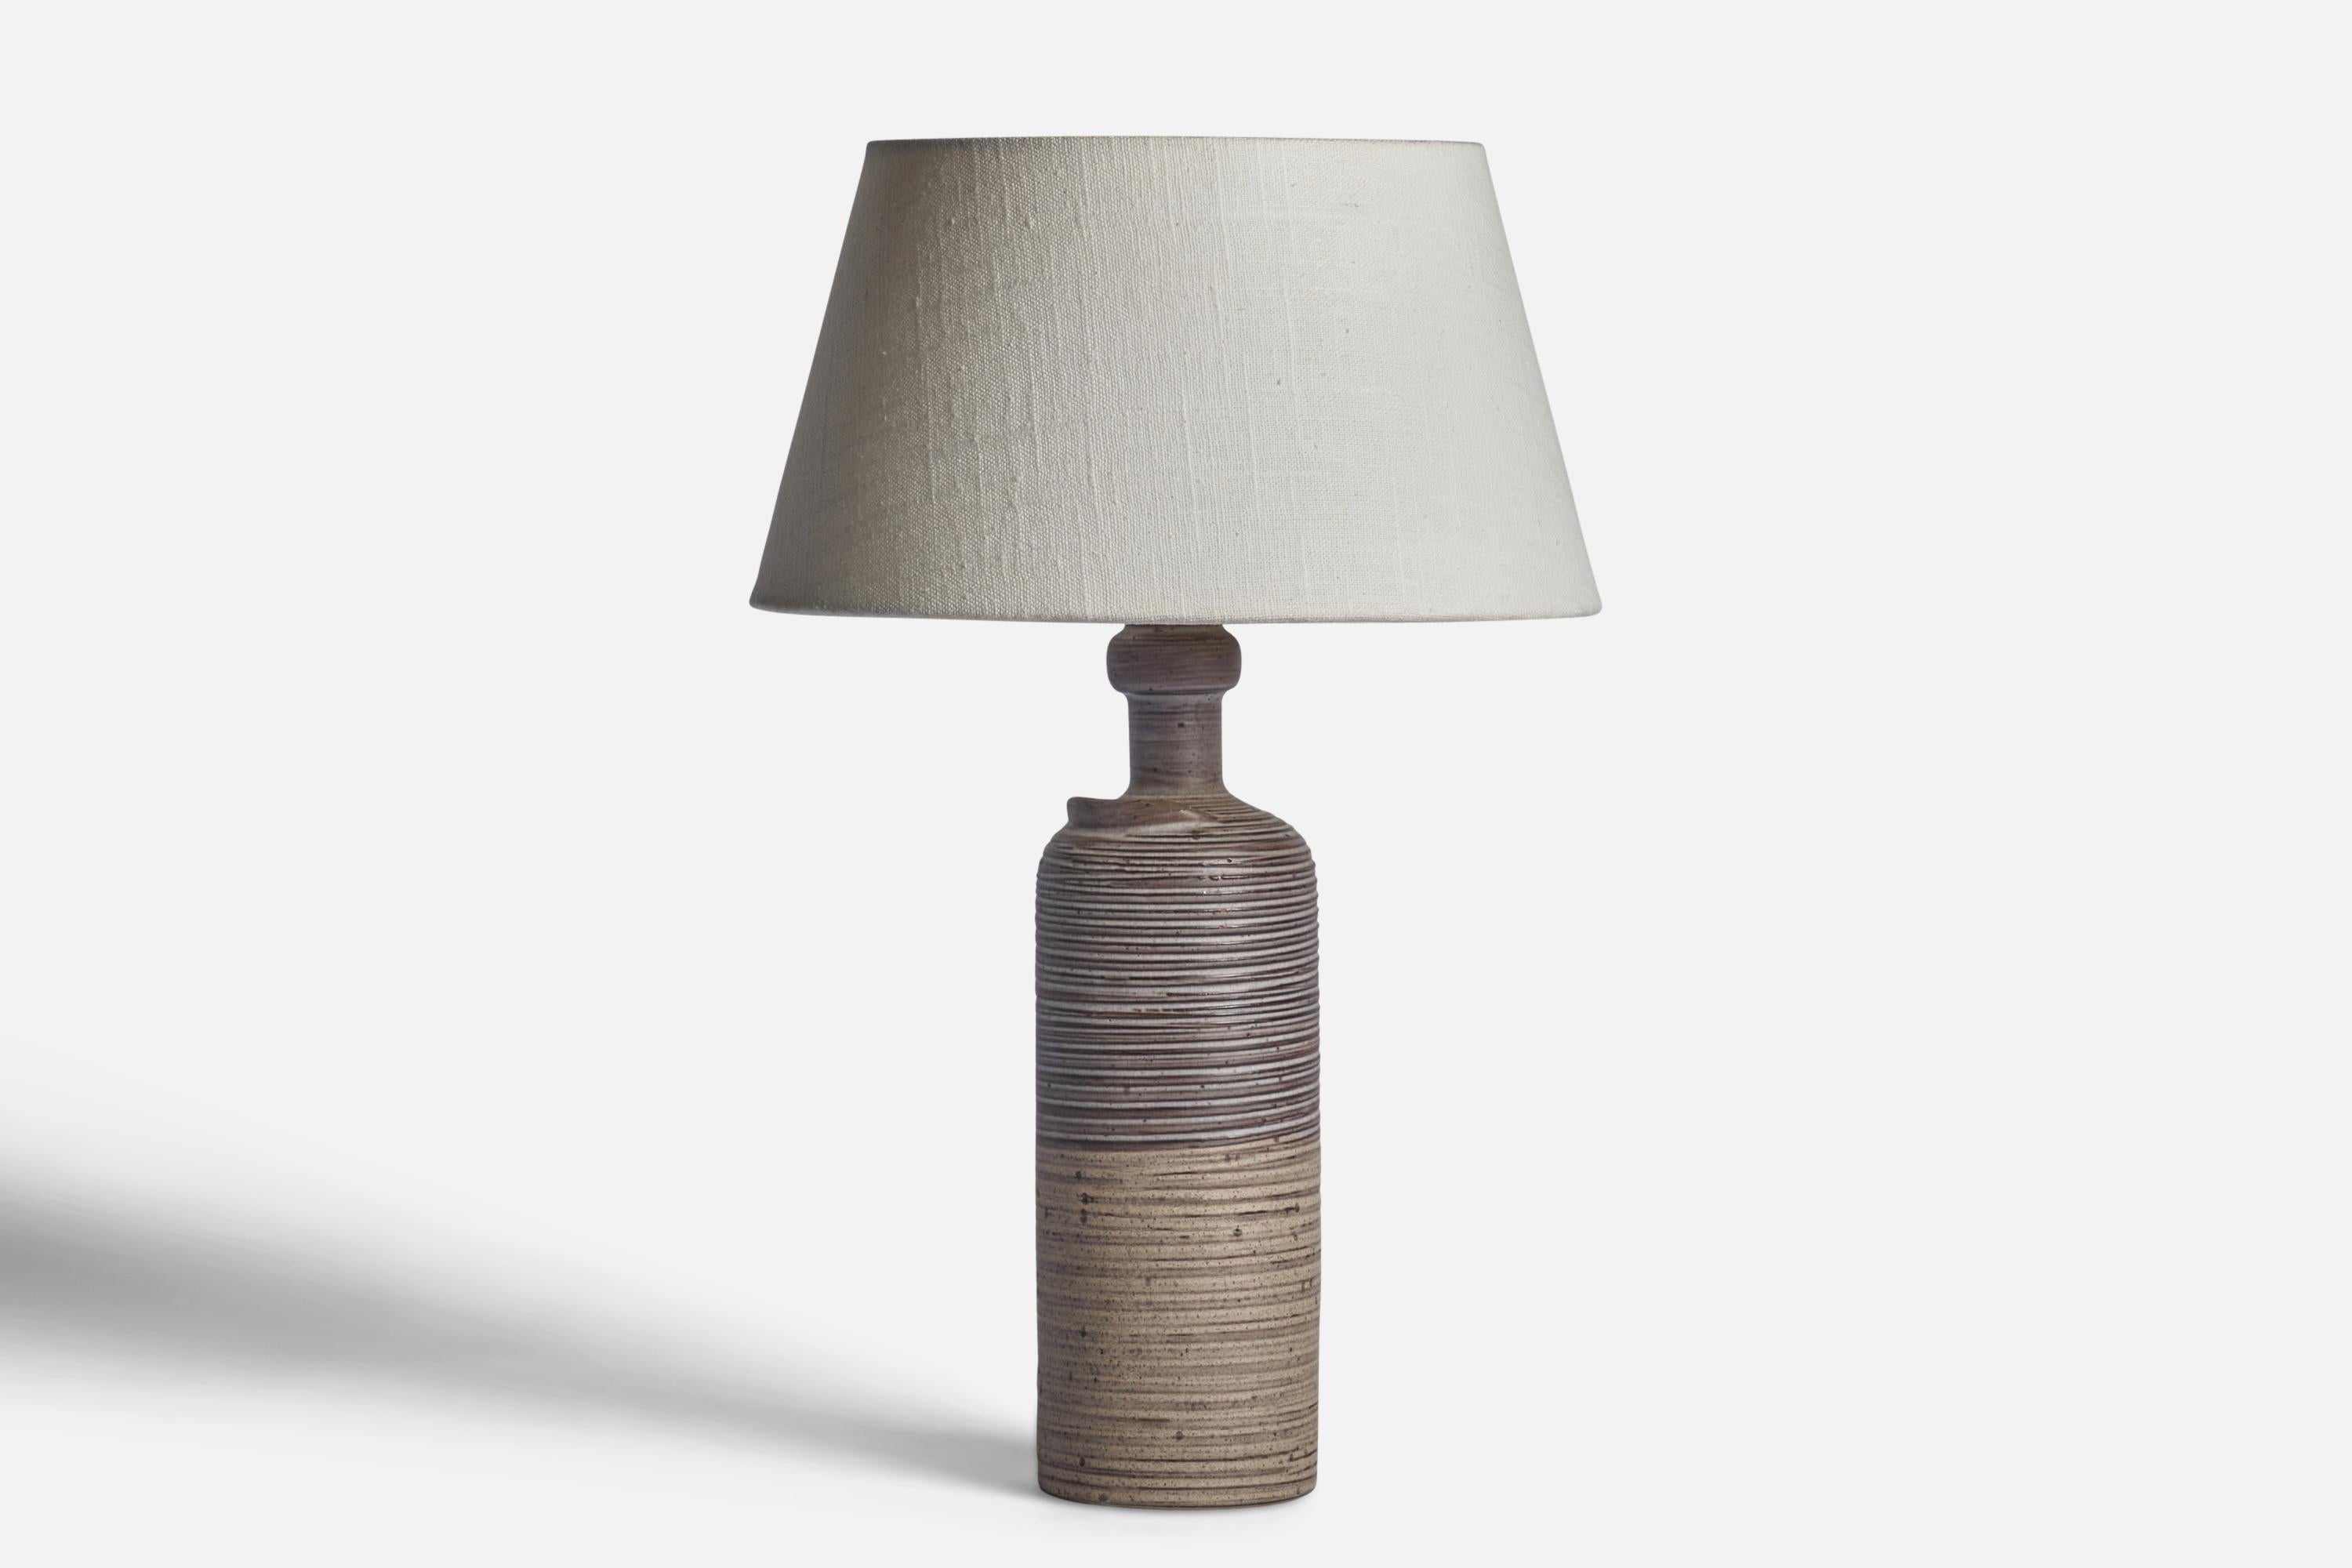 A grey-glazed incised ceramic table lamp designed by Thomas Hellström and produced by Nittsjö, Sweden, c. 1970s.

Dimensions of Lamp (inches): 12.75